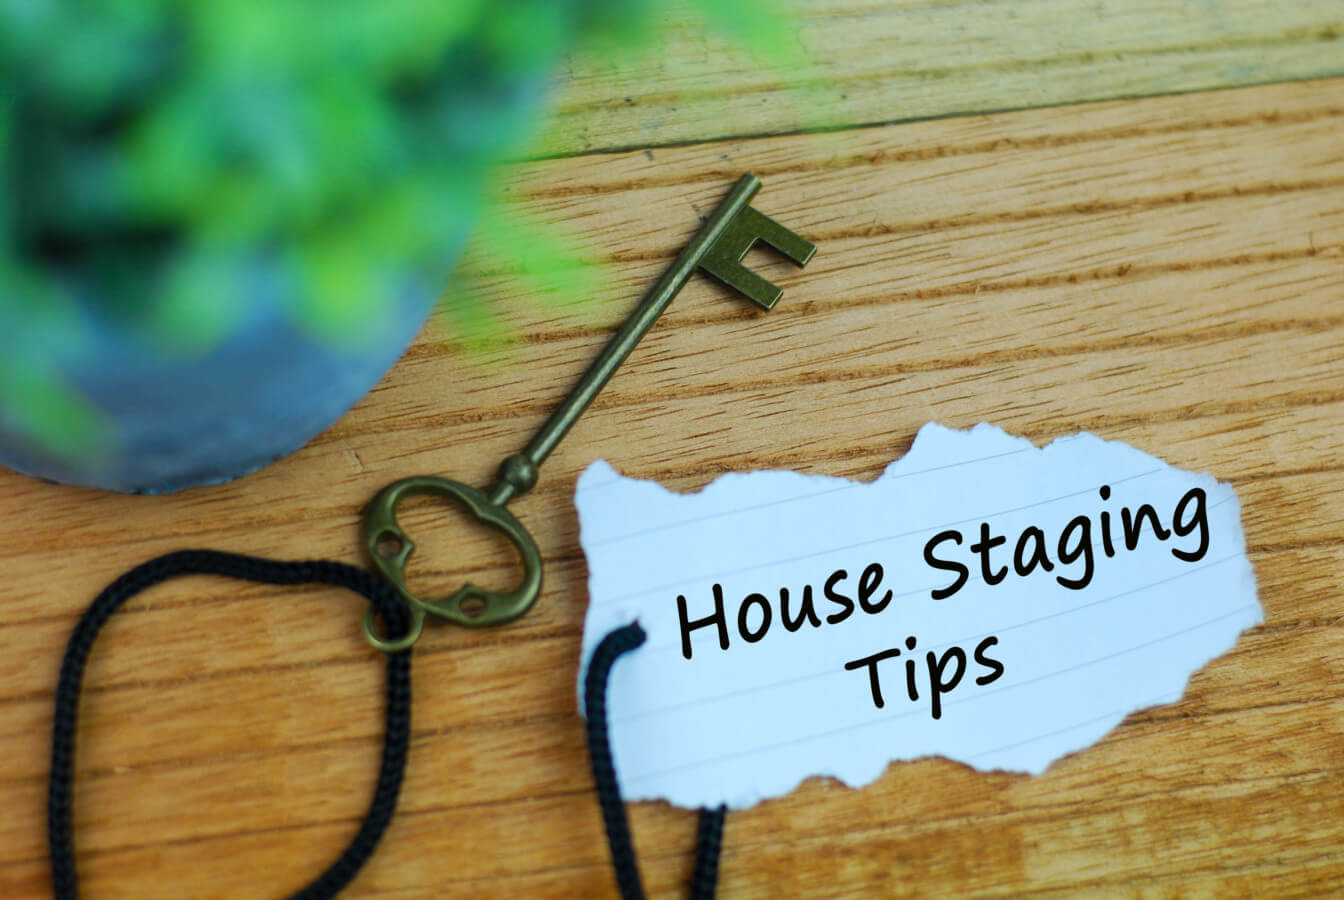 sell my house fast for cash house staging tips